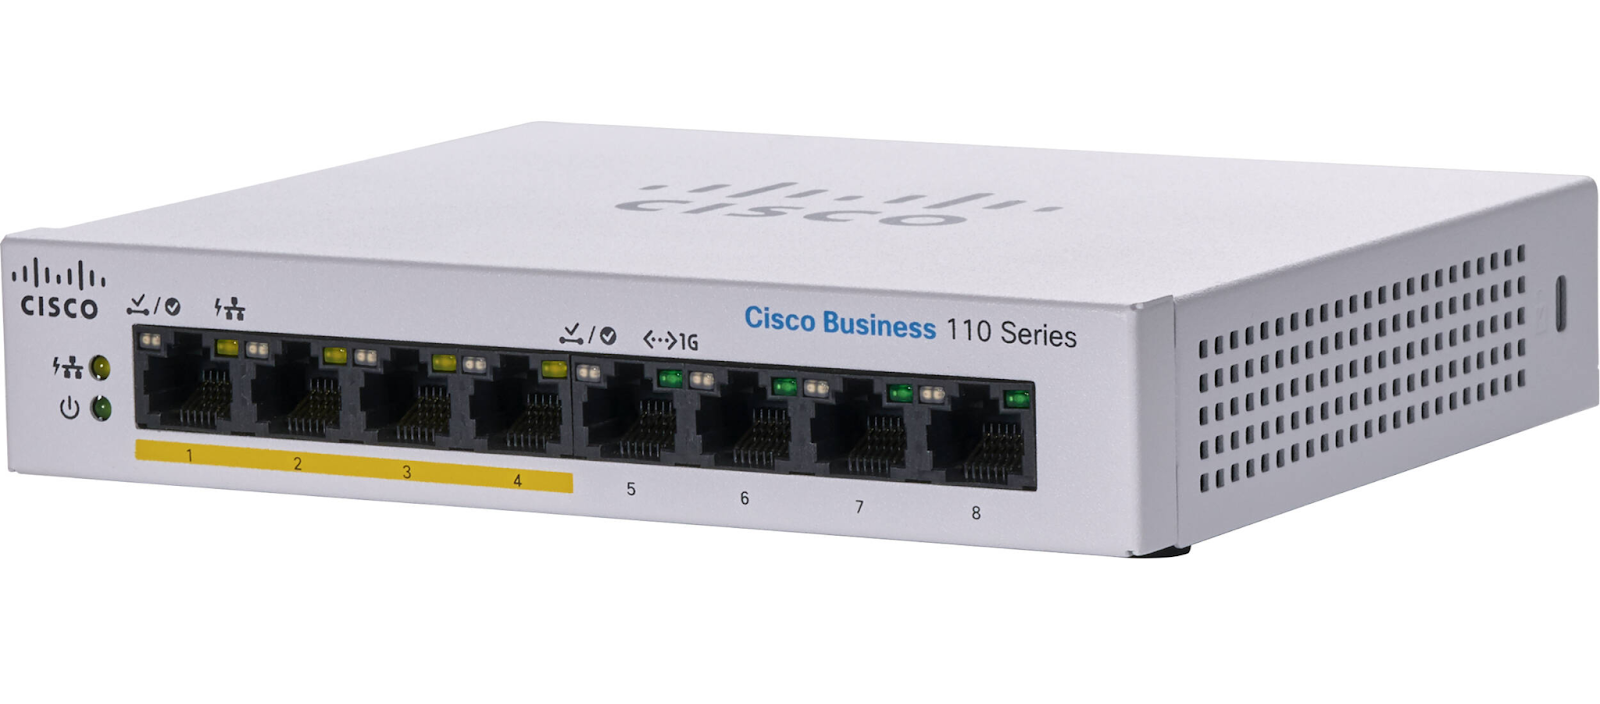 Network switch with PoE ports